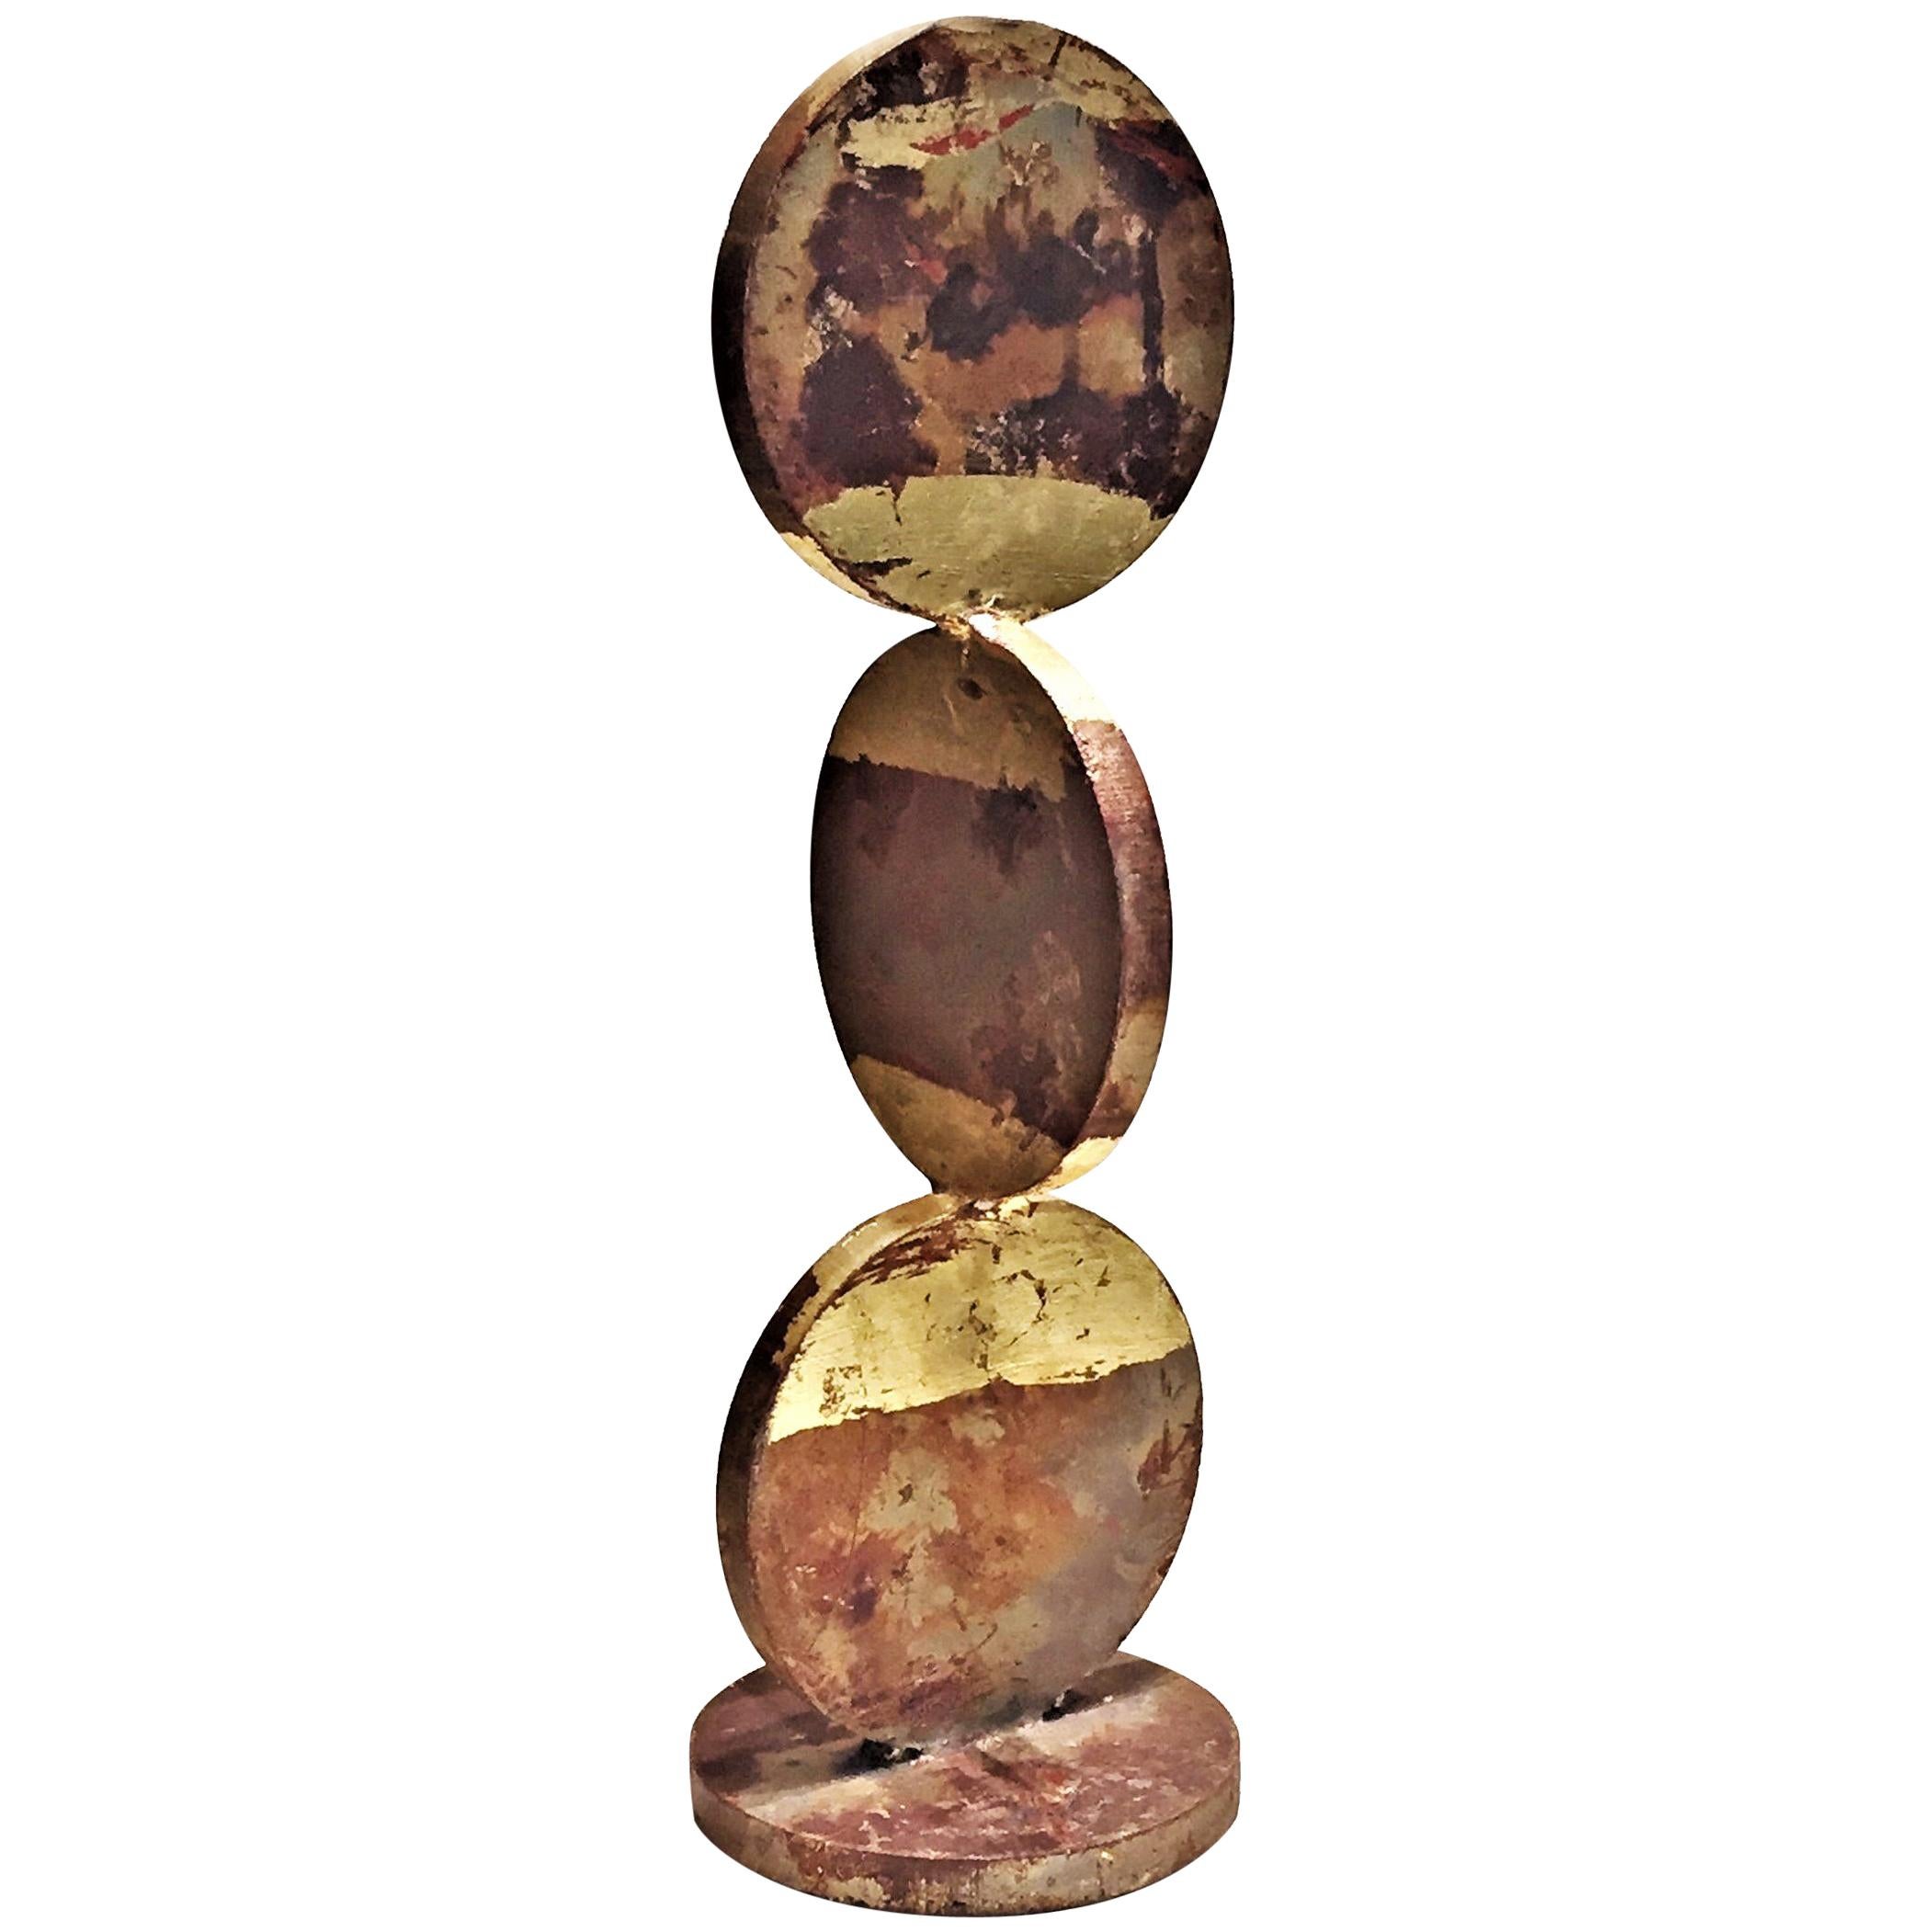 American Contemporary Anodized and Gold Painted Iron Sculpture, 21st Century For Sale